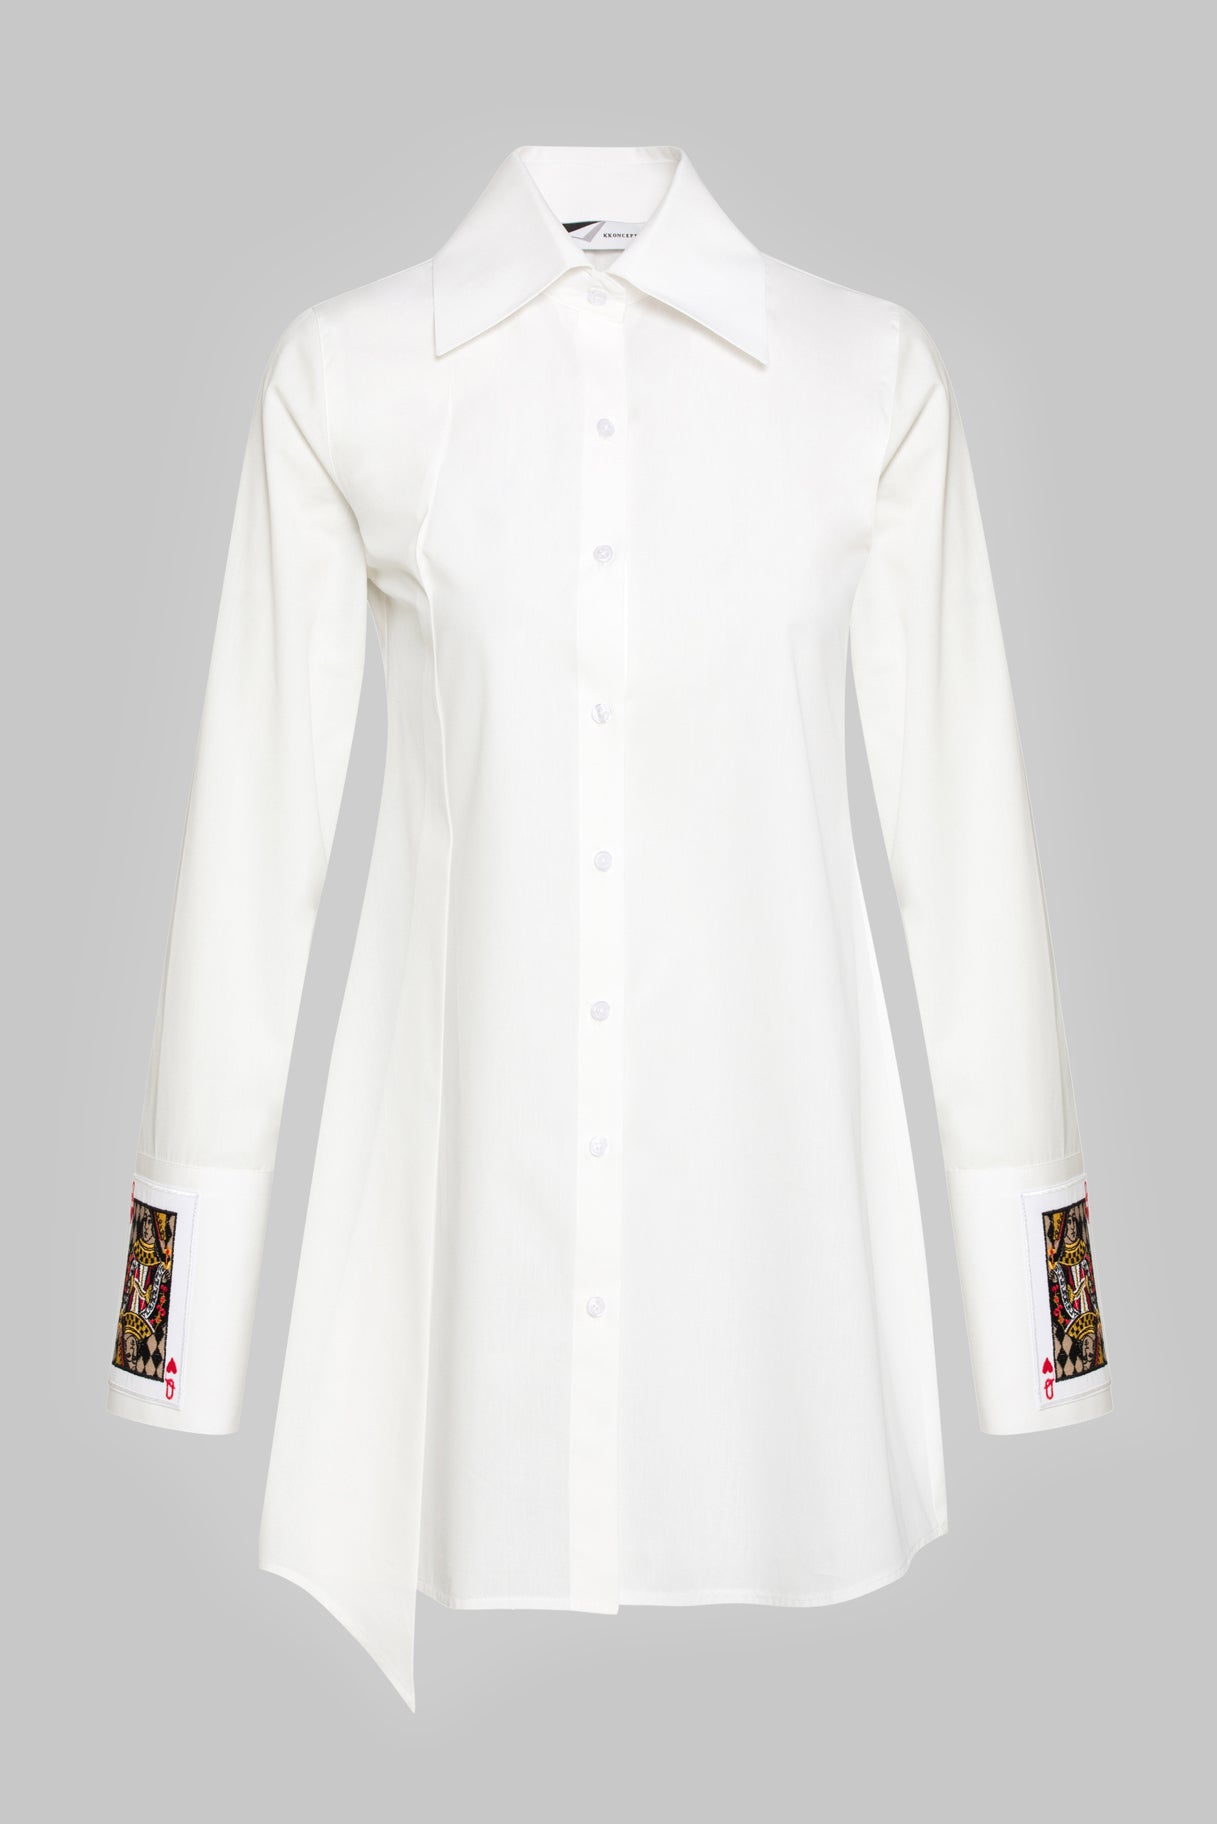 Crown Shirt İn White